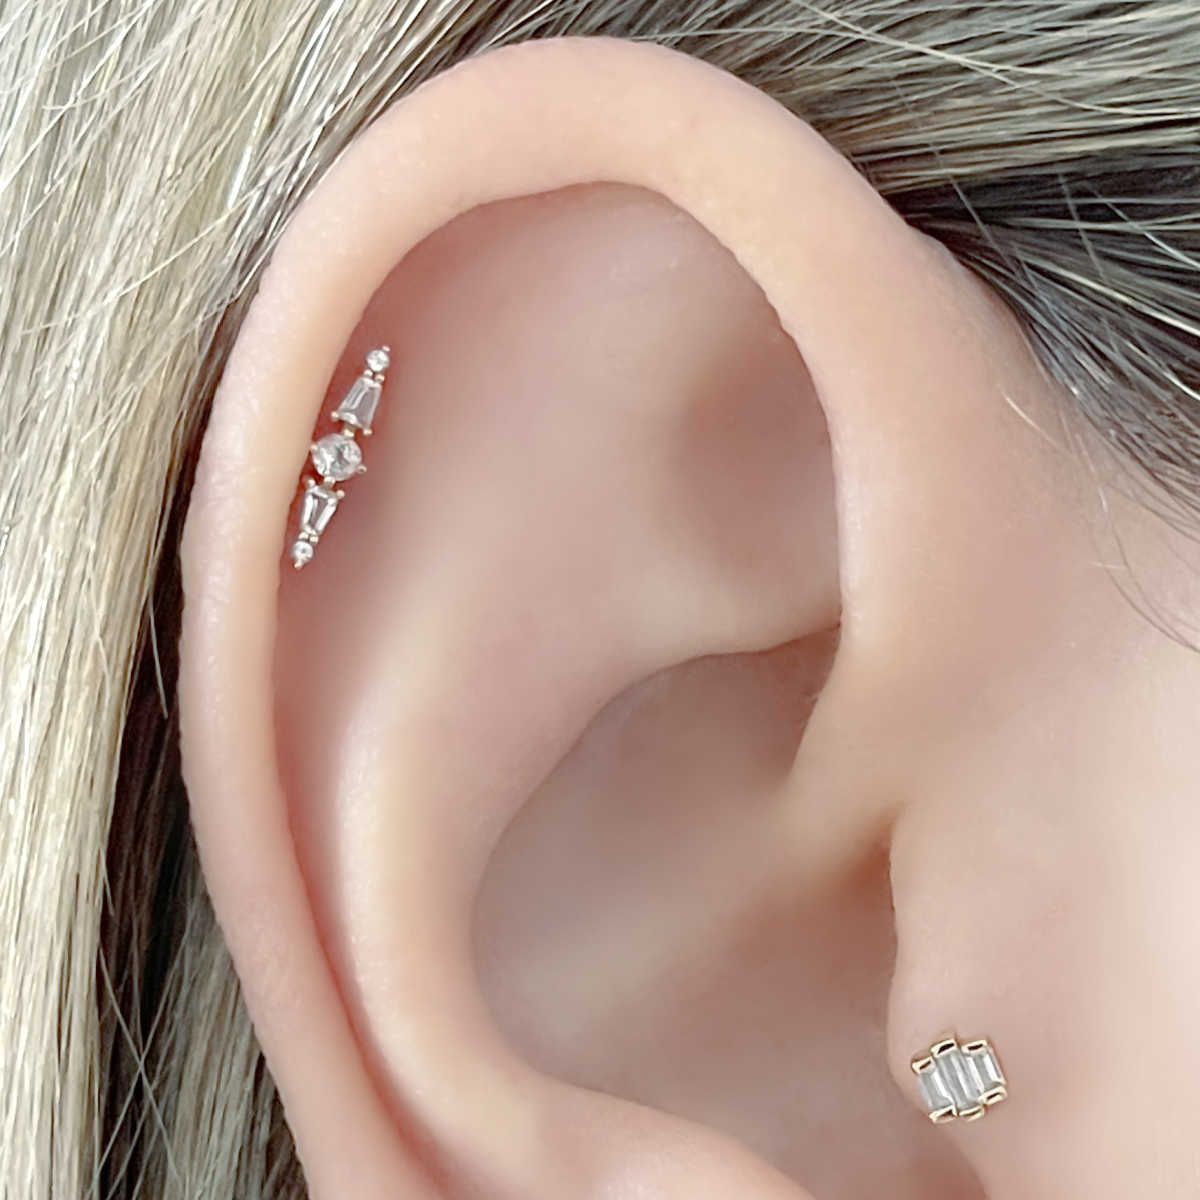 Studex | Ear Piercing Products, Earrings for Sensitive Ears and After  Piercing care